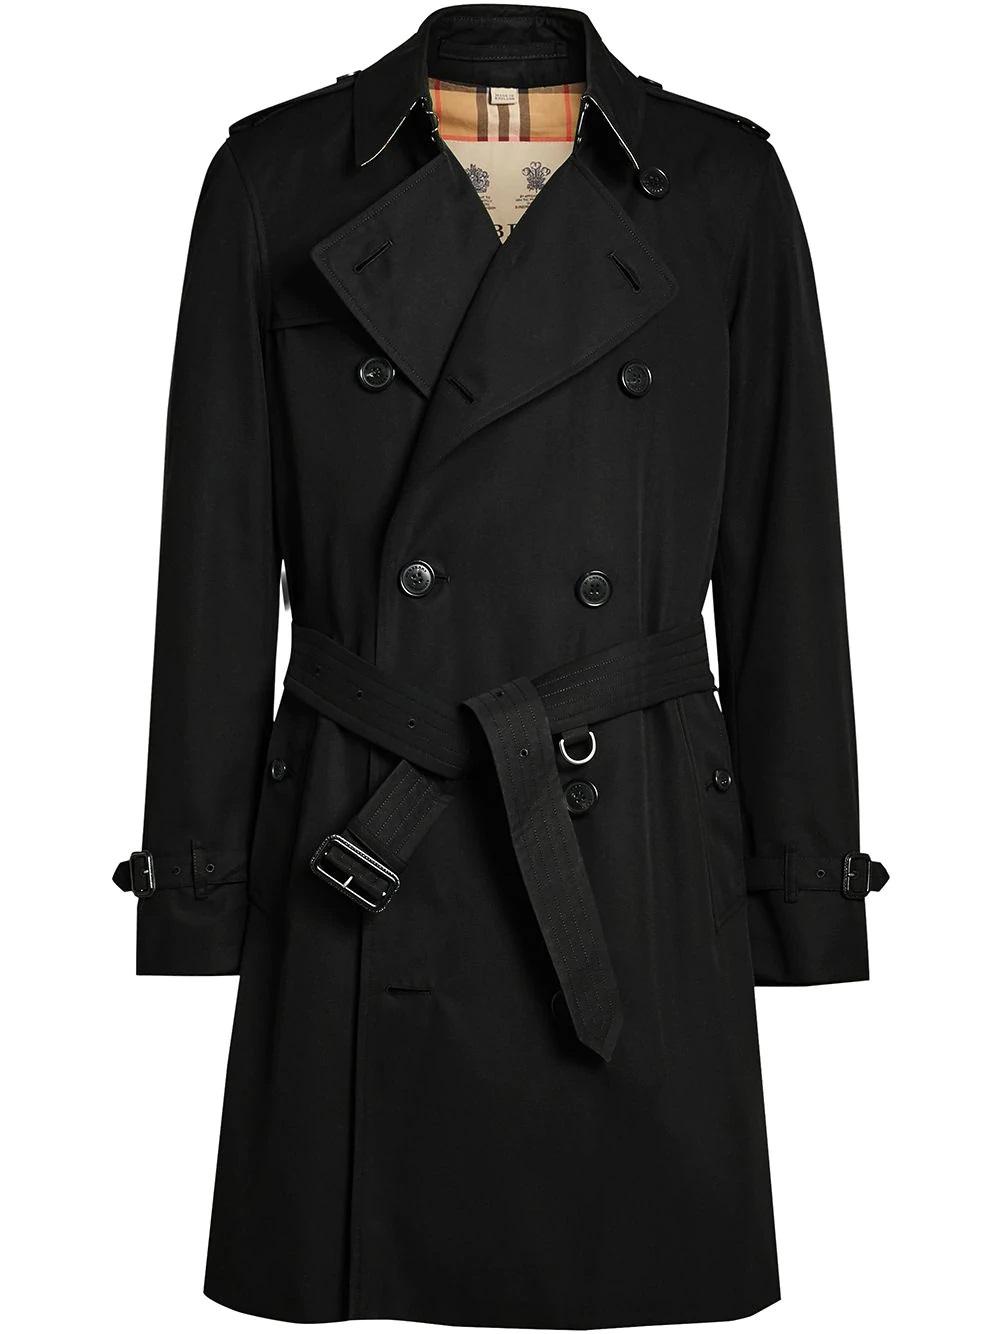 Burberry Cotton Chelsea Heritage Trench Coat in Black for Men - Lyst